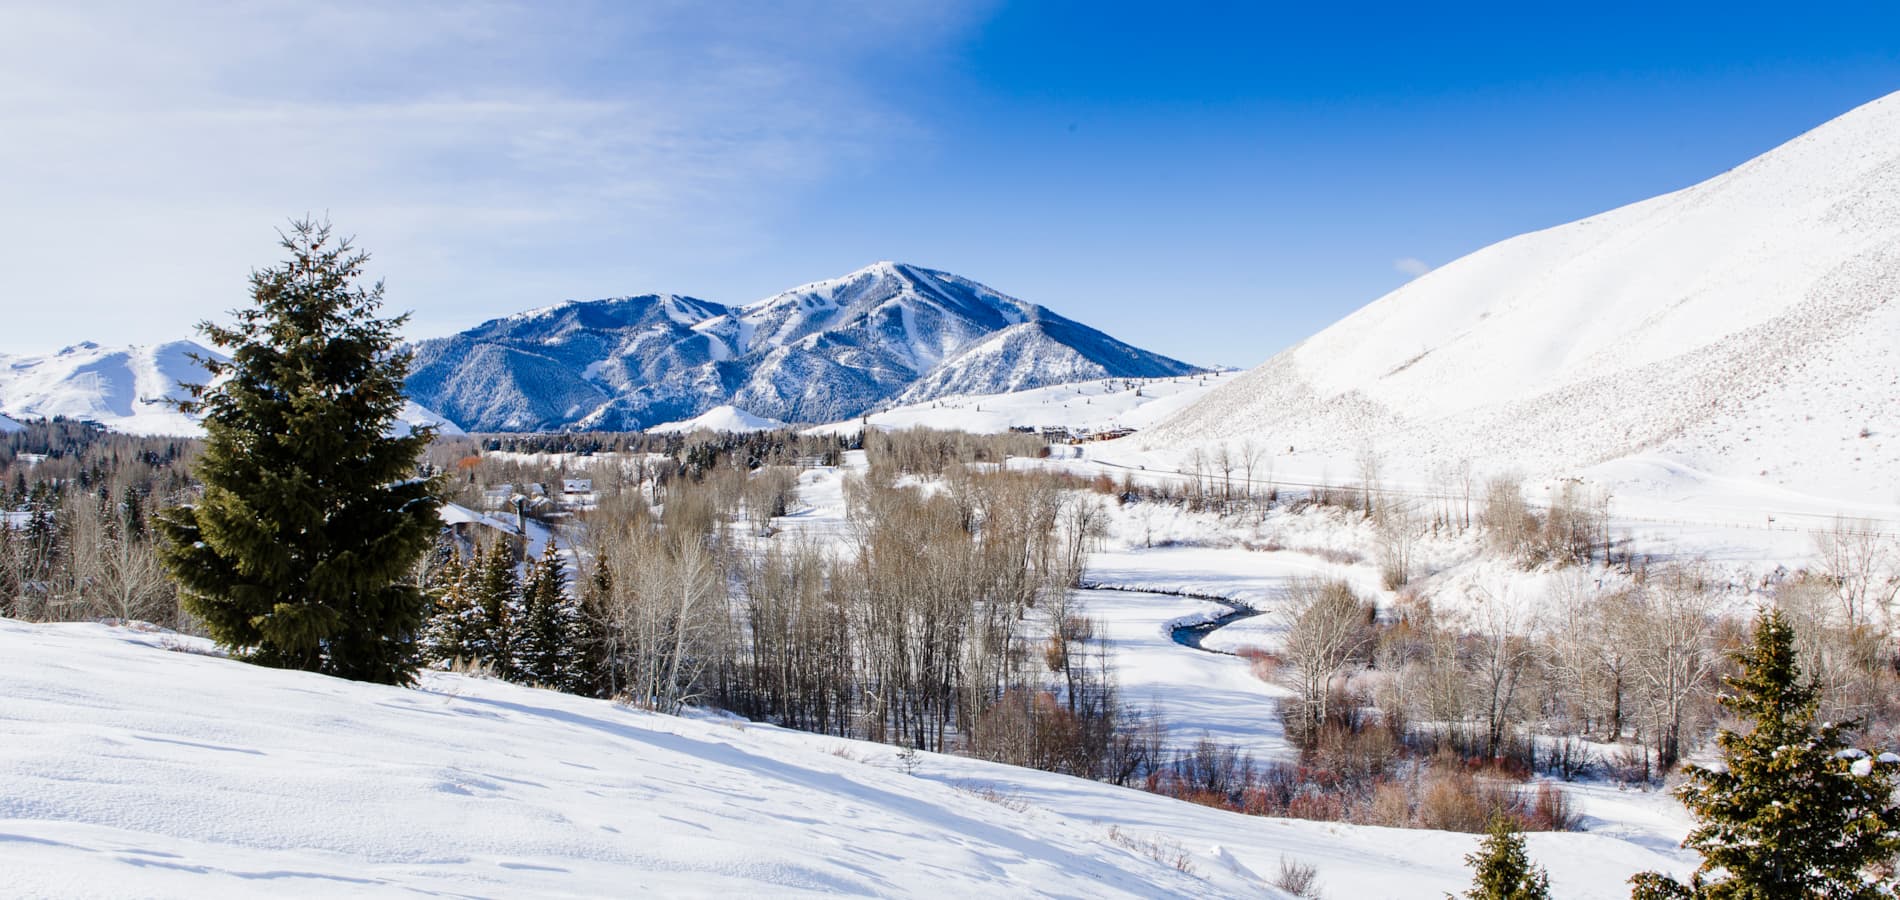 Image of Bald Mountain in the winter - Courtesy of Sun Valley Resort; Image by Gadd Ray, 2019